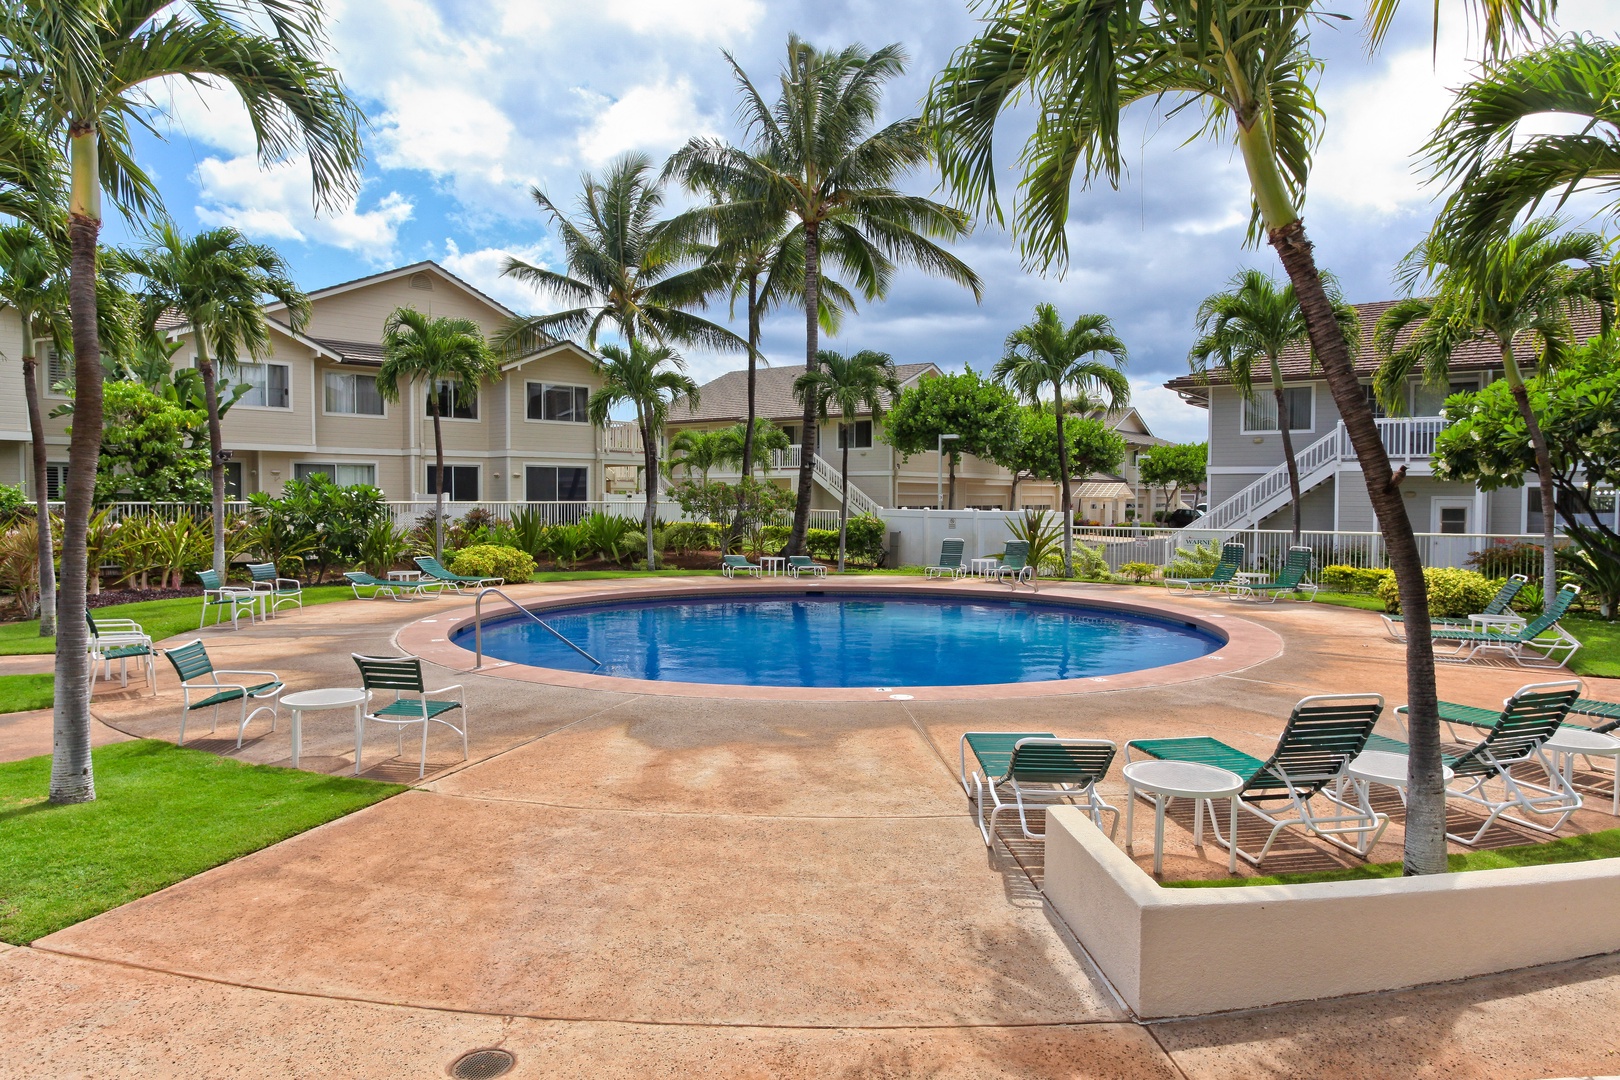 Kapolei Vacation Rentals, Fairways at Ko Olina 4A - Relax by the community pool with your favorite book.